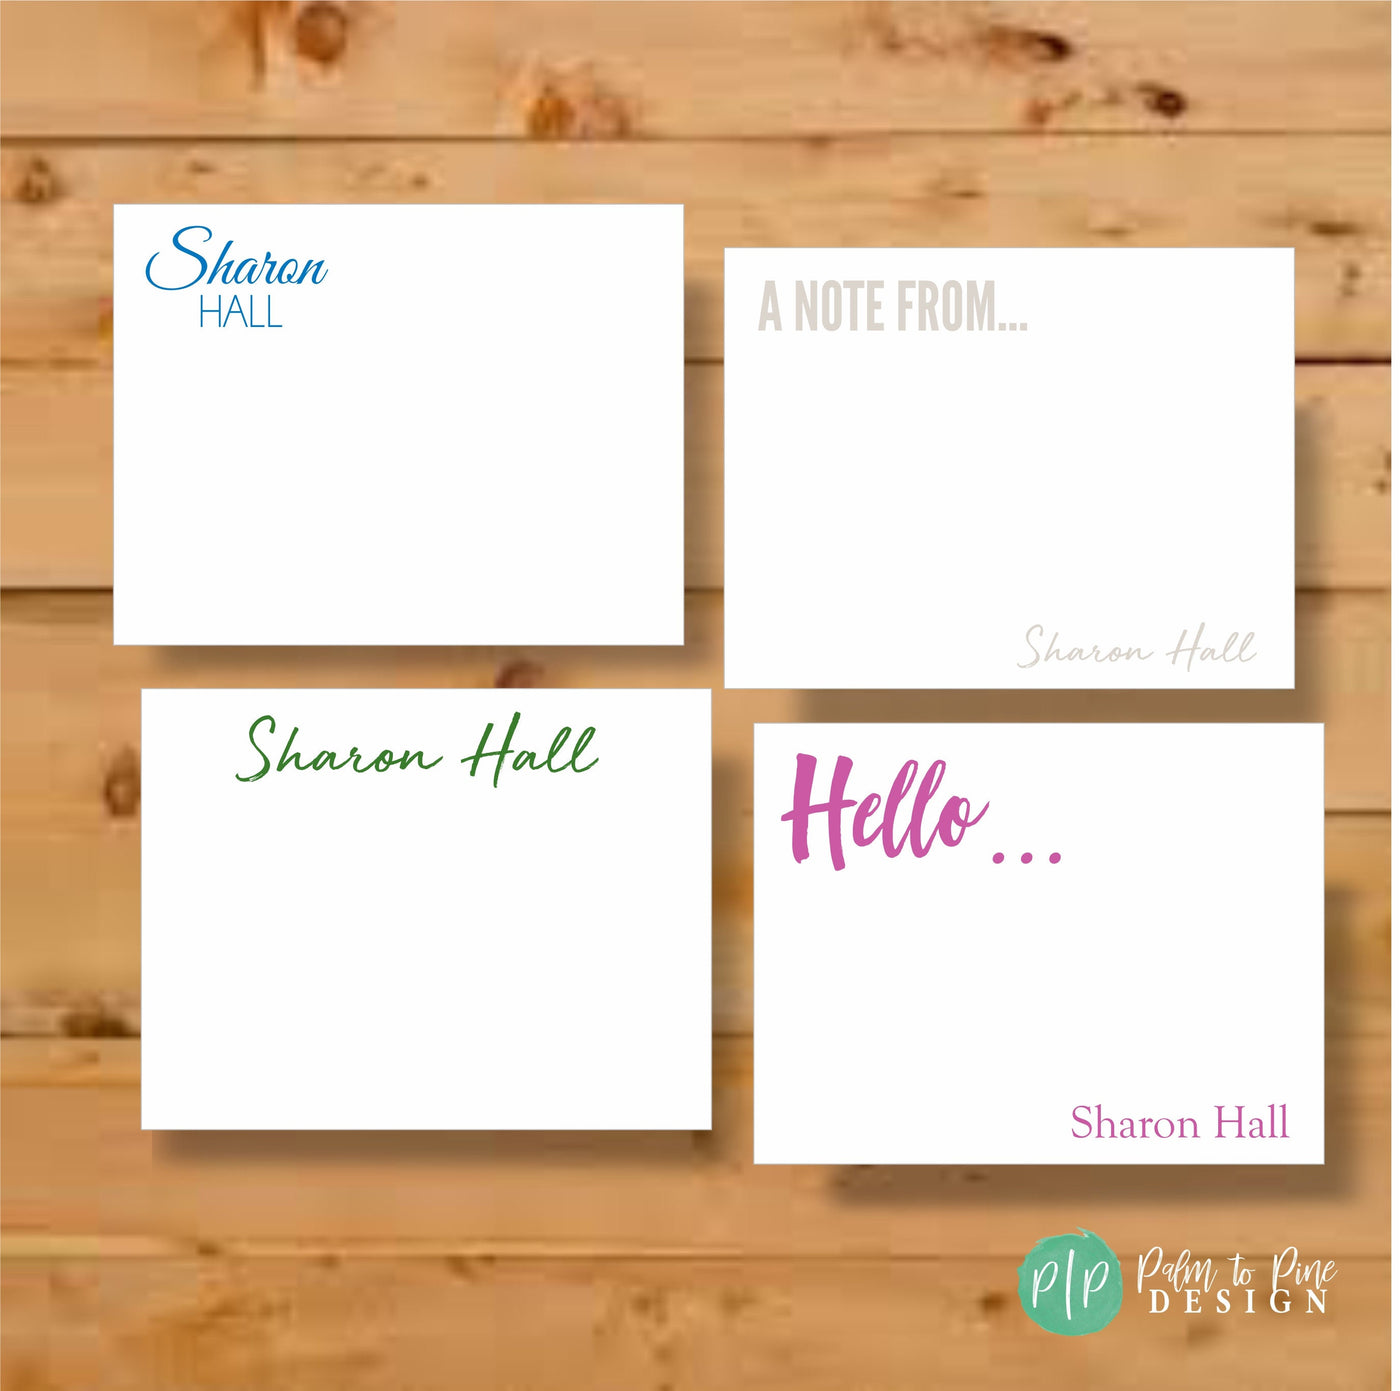 Personalized Note Card, Personalized Stationary, Stationary Cards, Teacher Gift, Stationery Personalized, Stationary Set, Personalized Cards